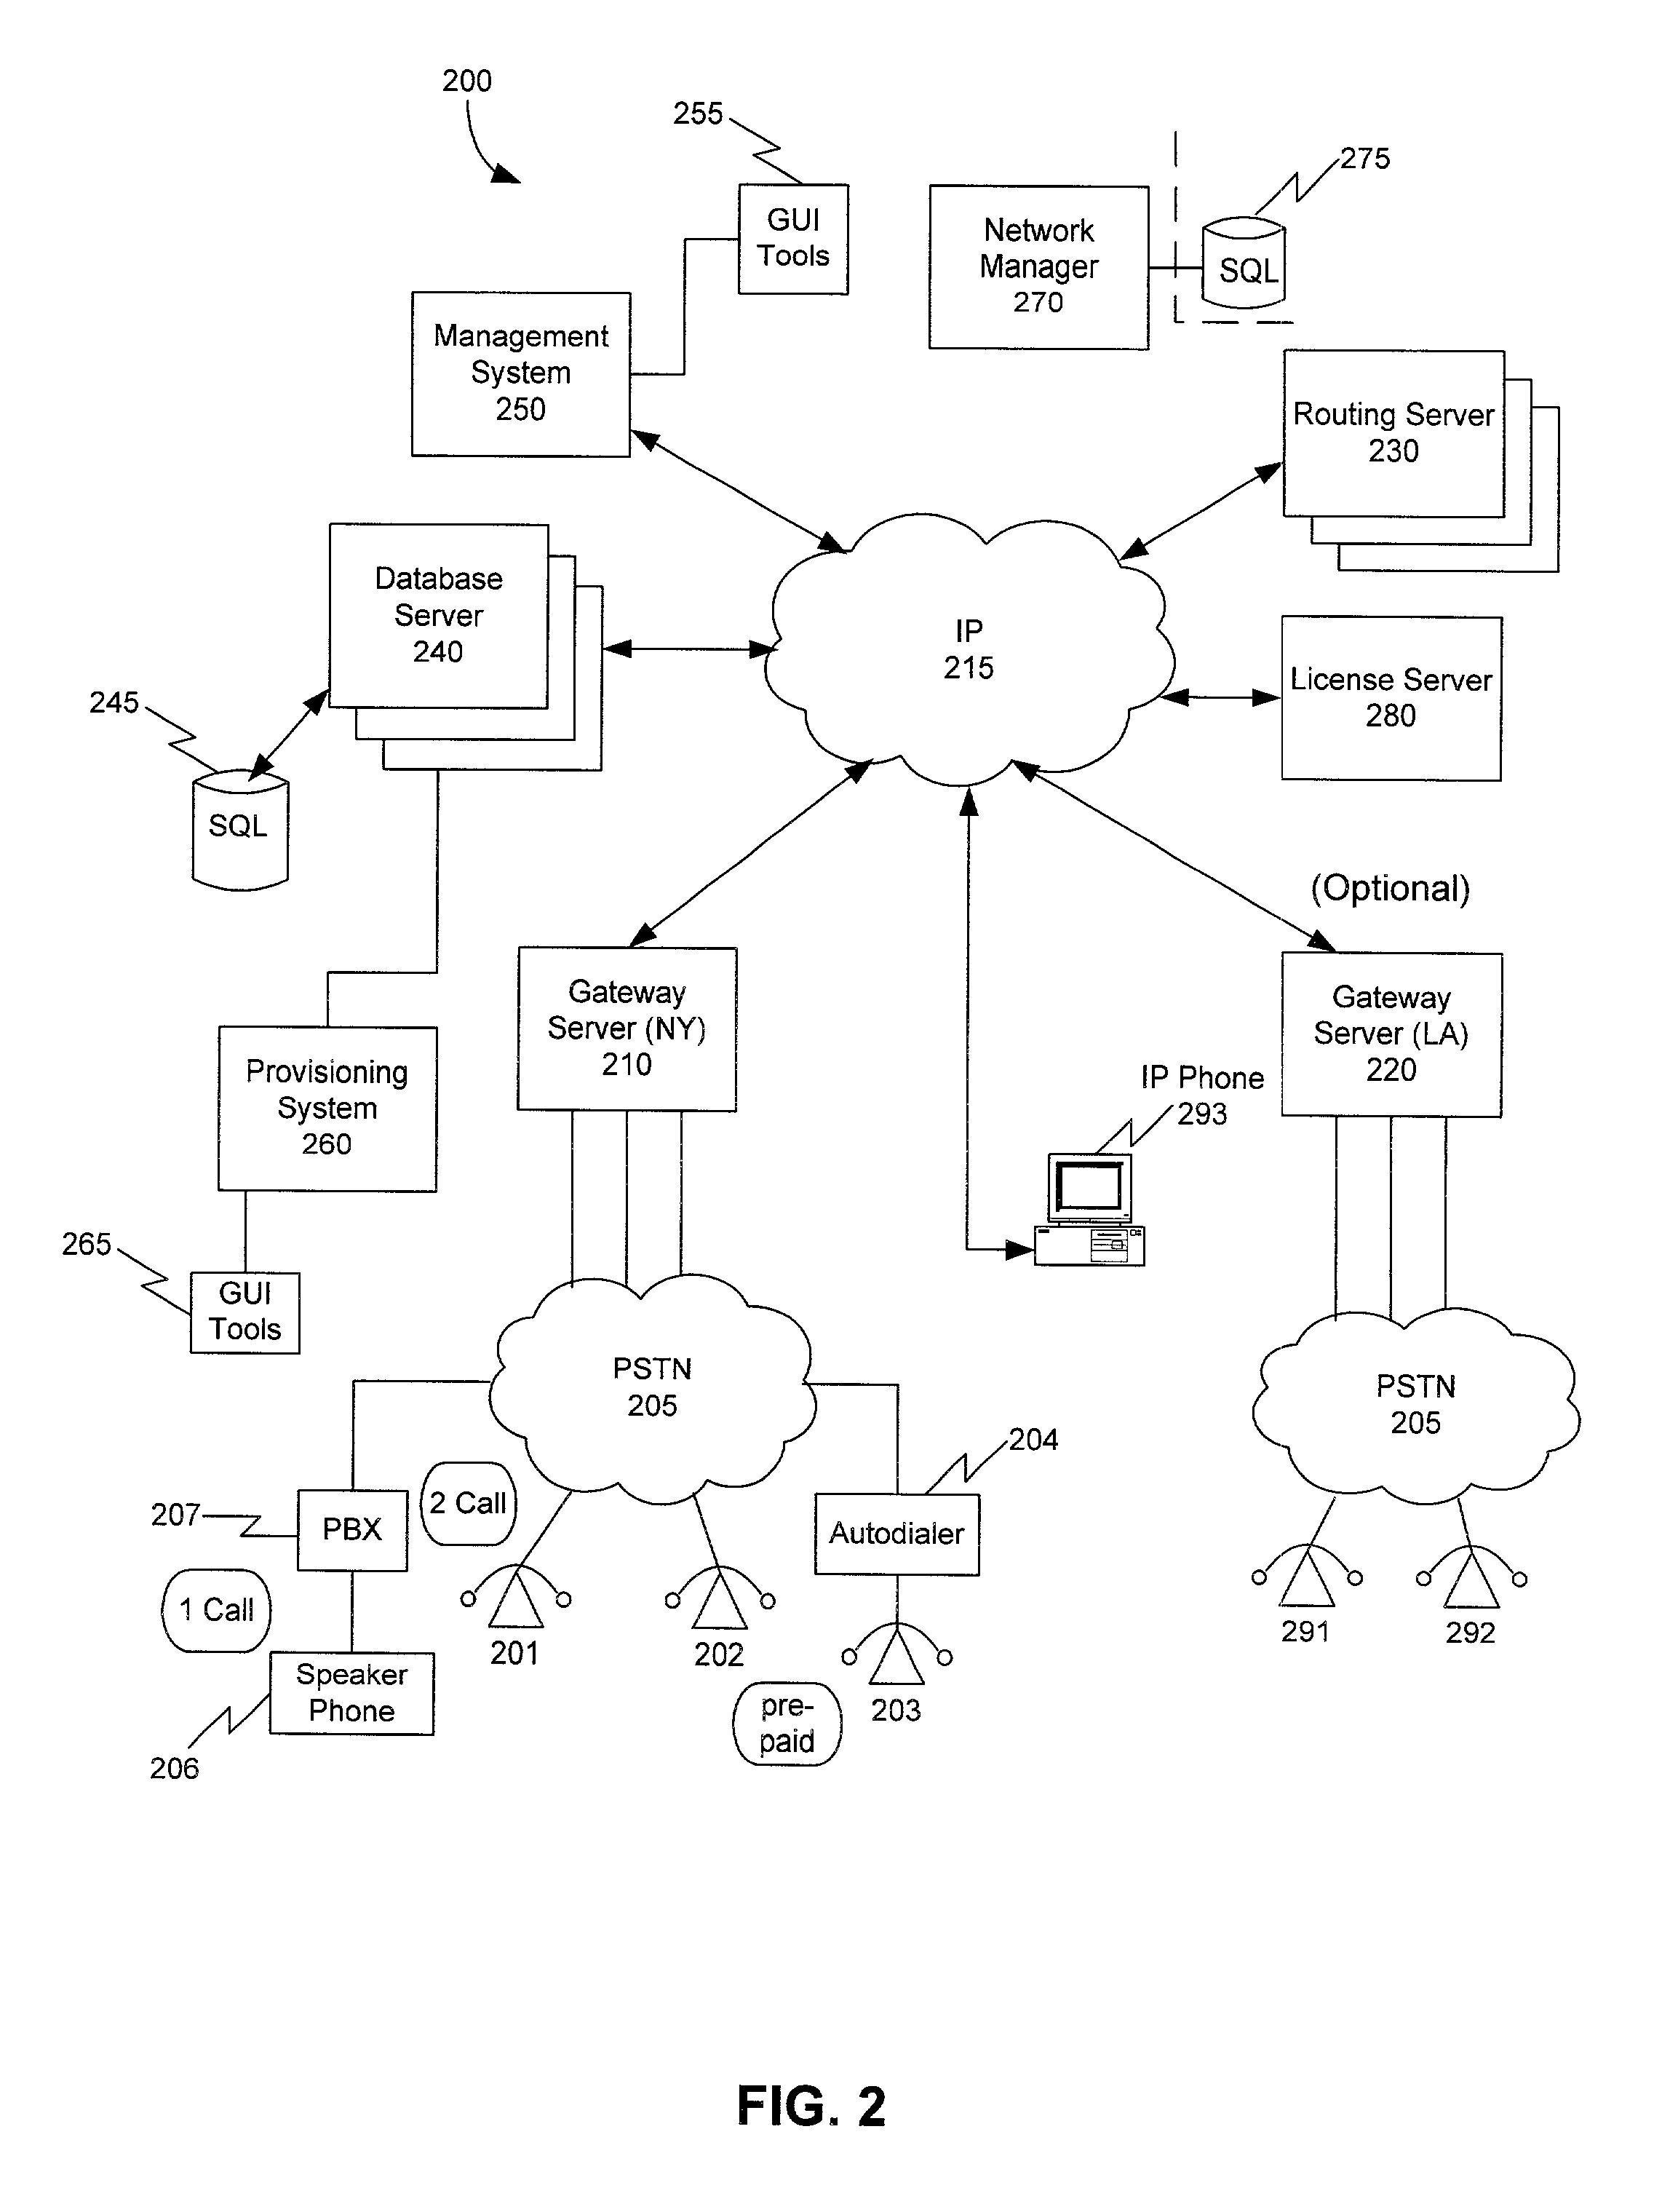 Method, system, and computer program product for managing database servers and service